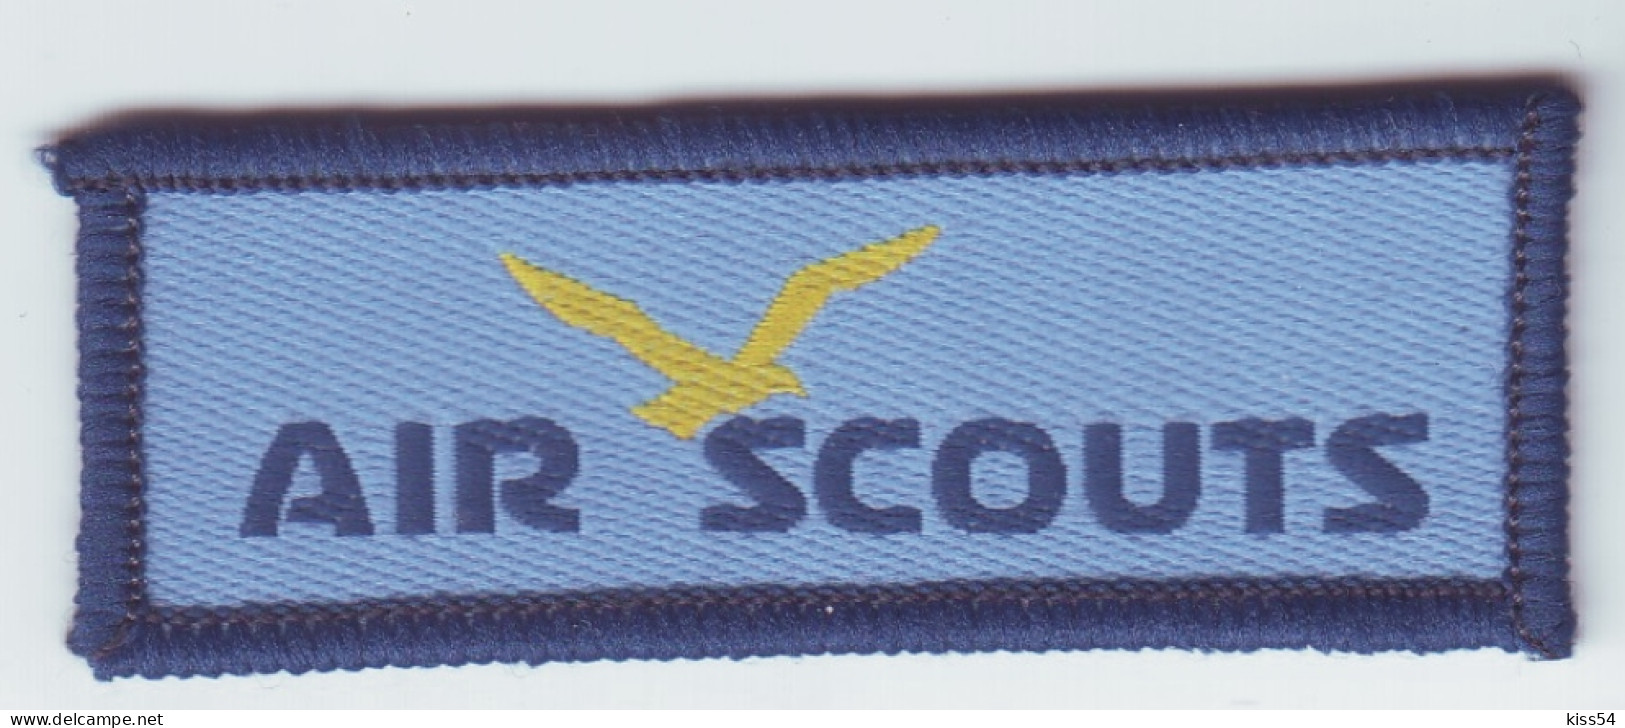 B 19 - 105 ENGLAND Scout Badge - AIR SCOUTS - Movimiento Scout